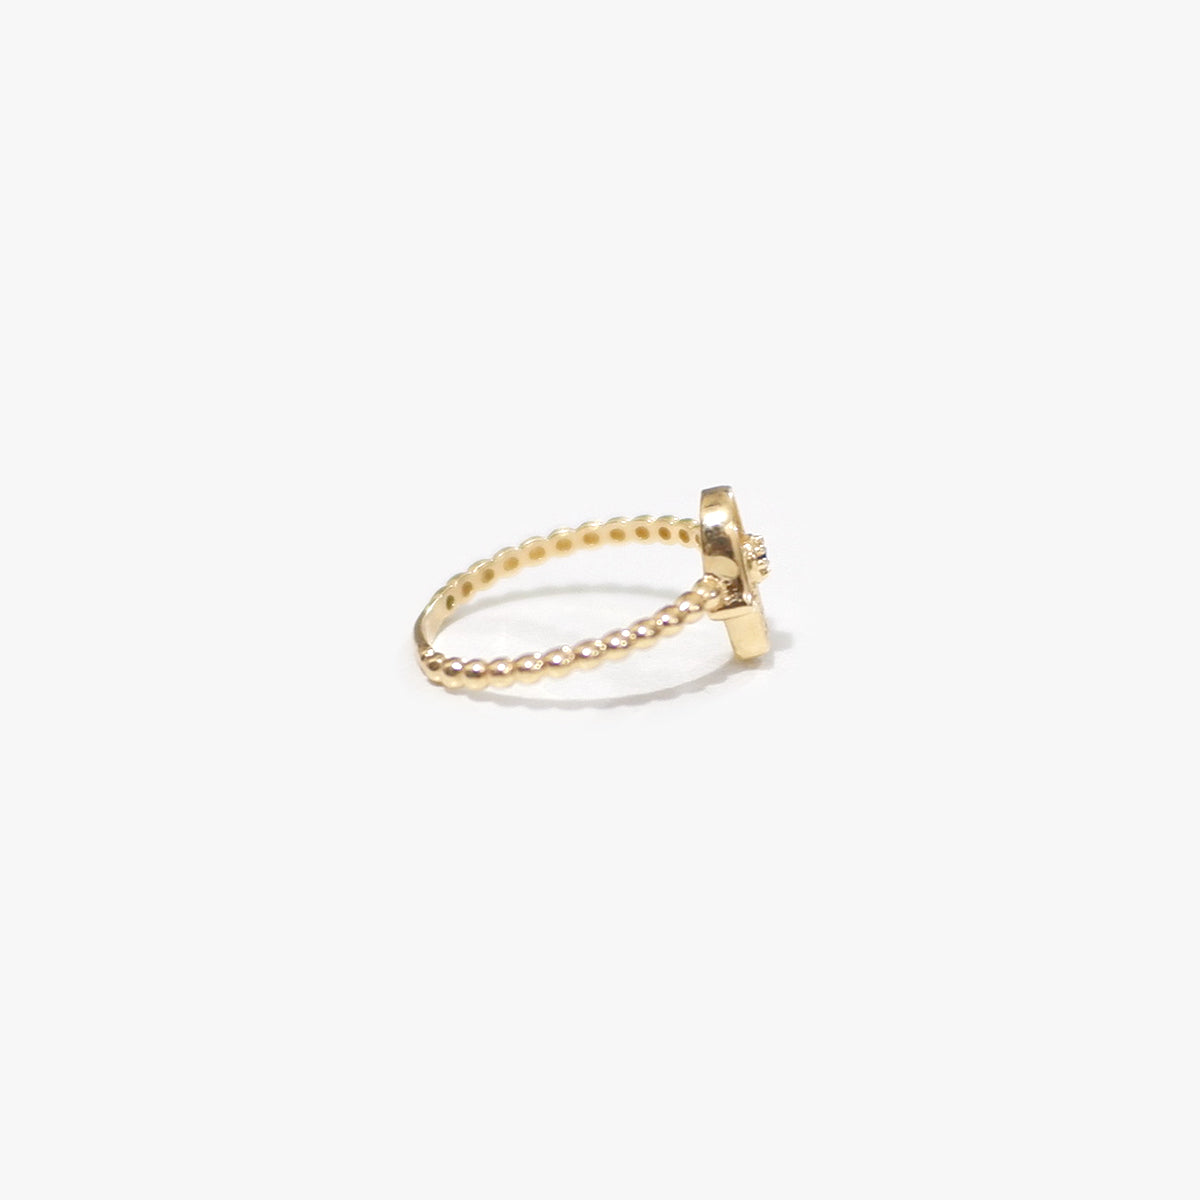 The Hamsa Birthstone Ring in Solid Gold